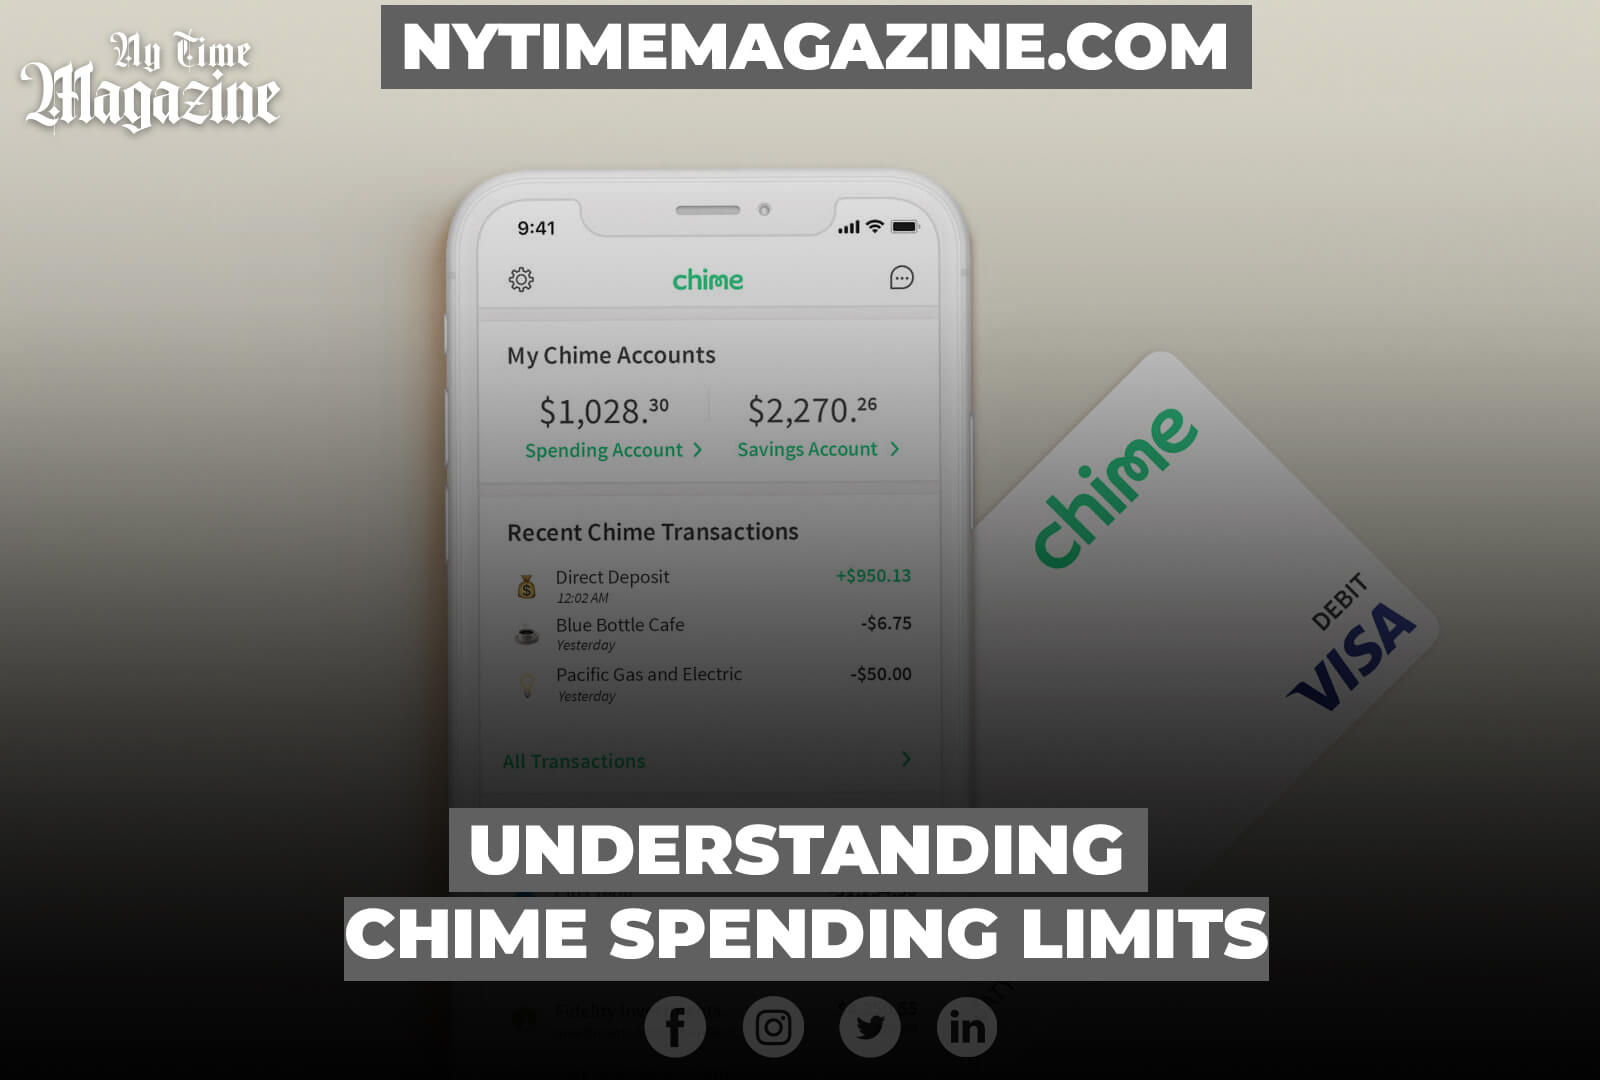 UNDERSTANDING CHIME SPENDING LIMITS